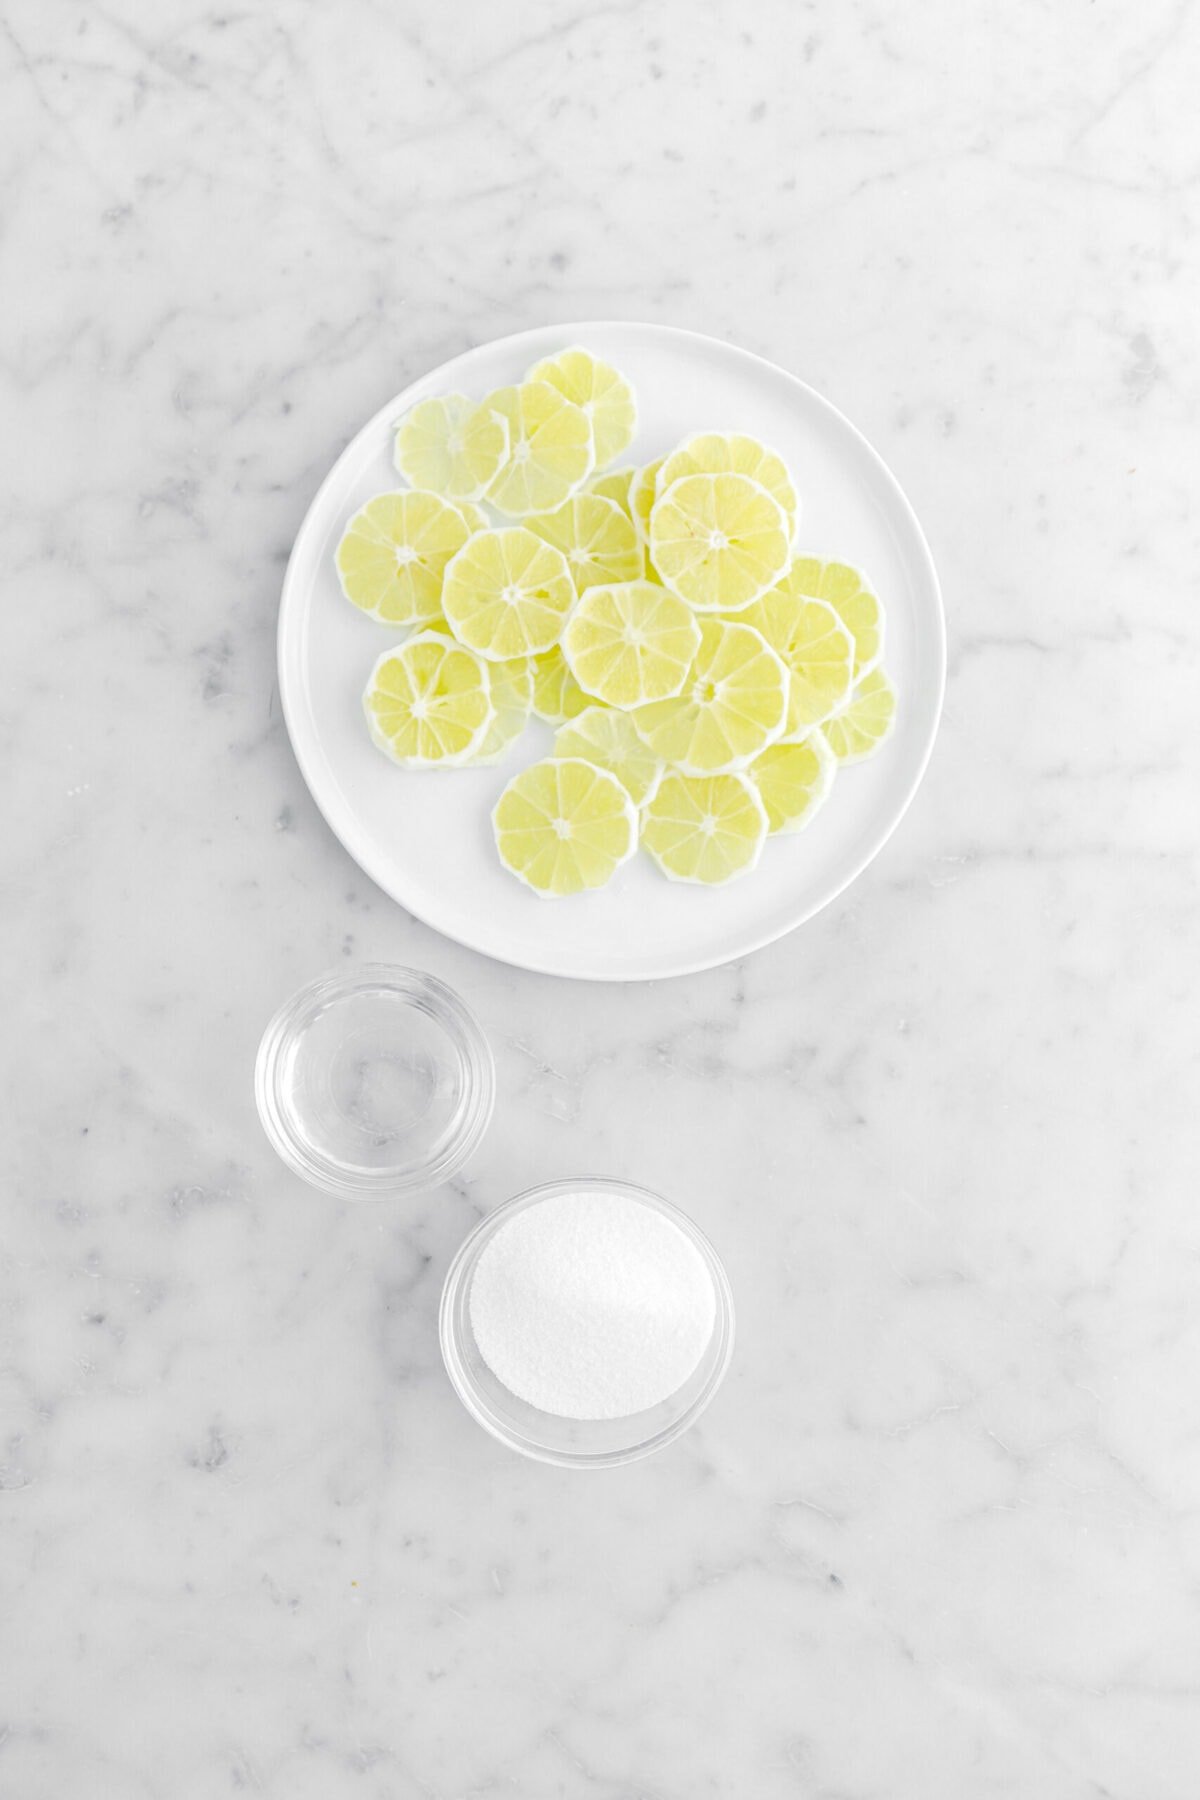 lemon slices, water, and sugar on marble surface.